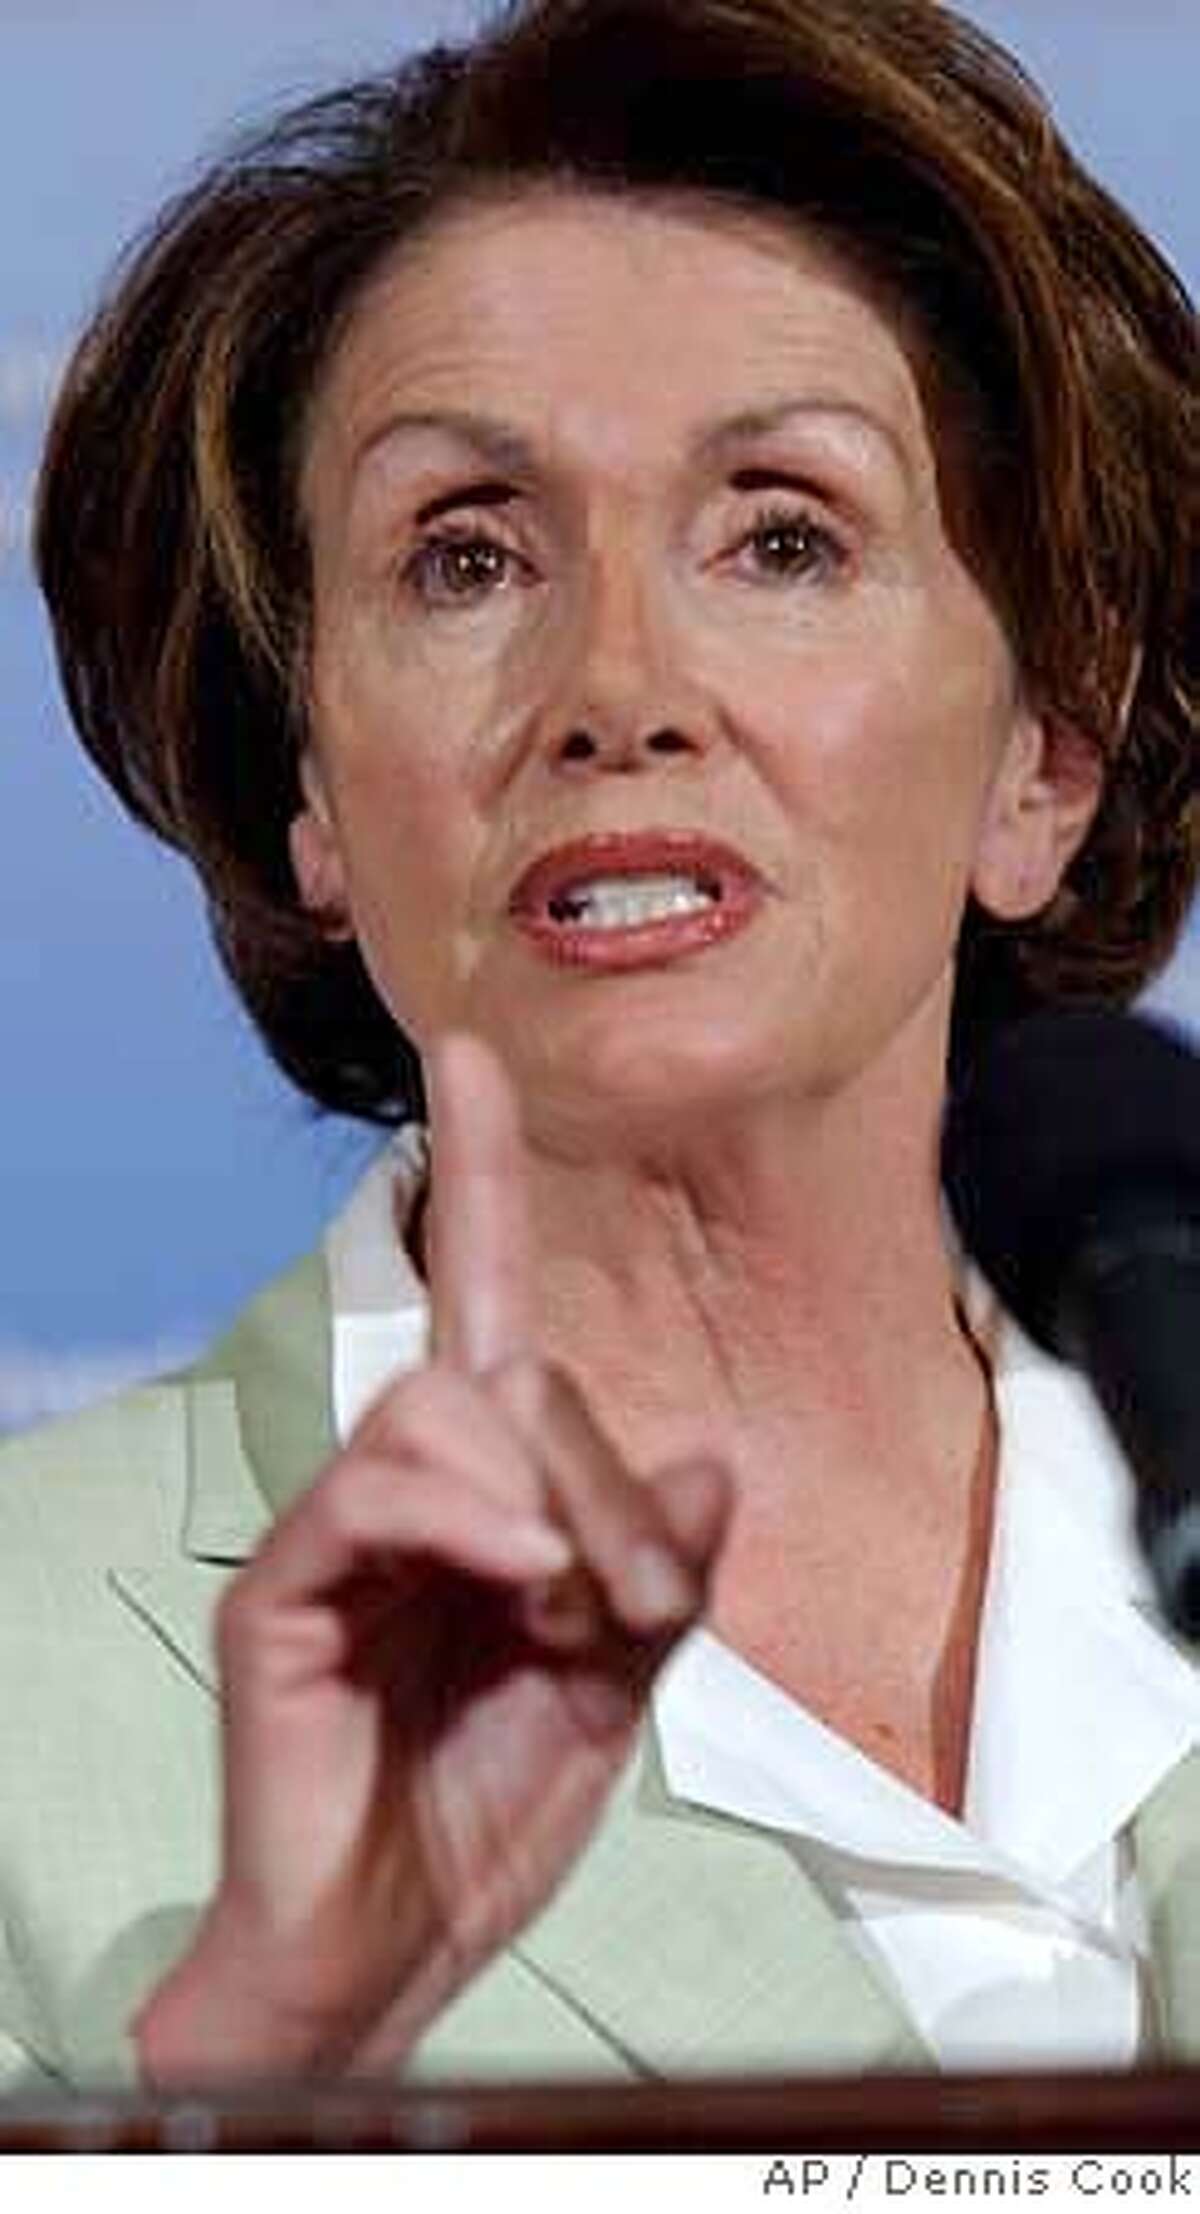 House Speaker Nancy Pelosi of Calif., gestures during a news conference on Capitol Hill in Washington, Friday, June 29, 2007. (AP Photo/Dennis Cook)